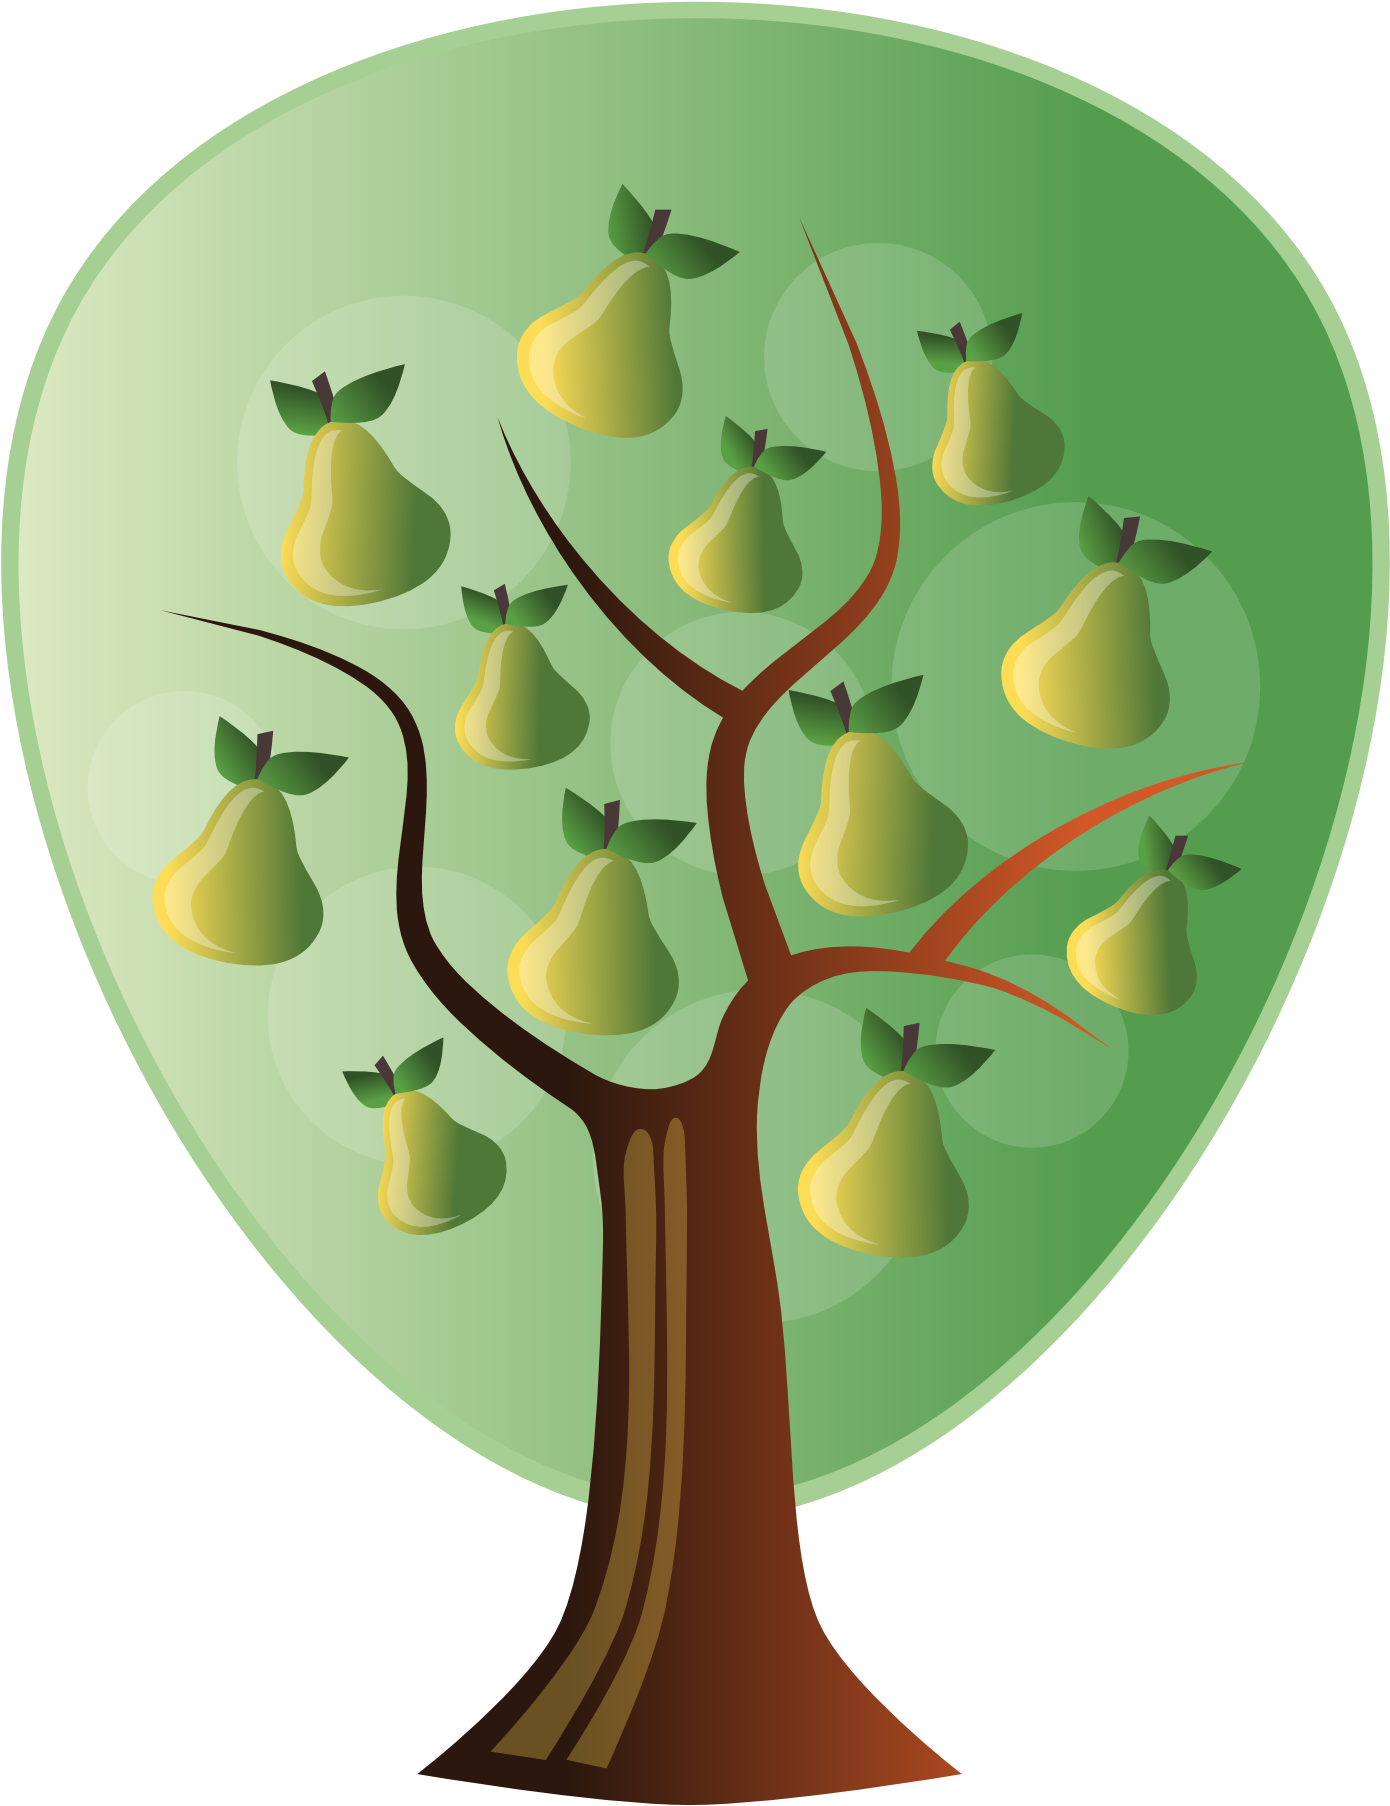 Stylized Pear Tree Illustration PNG